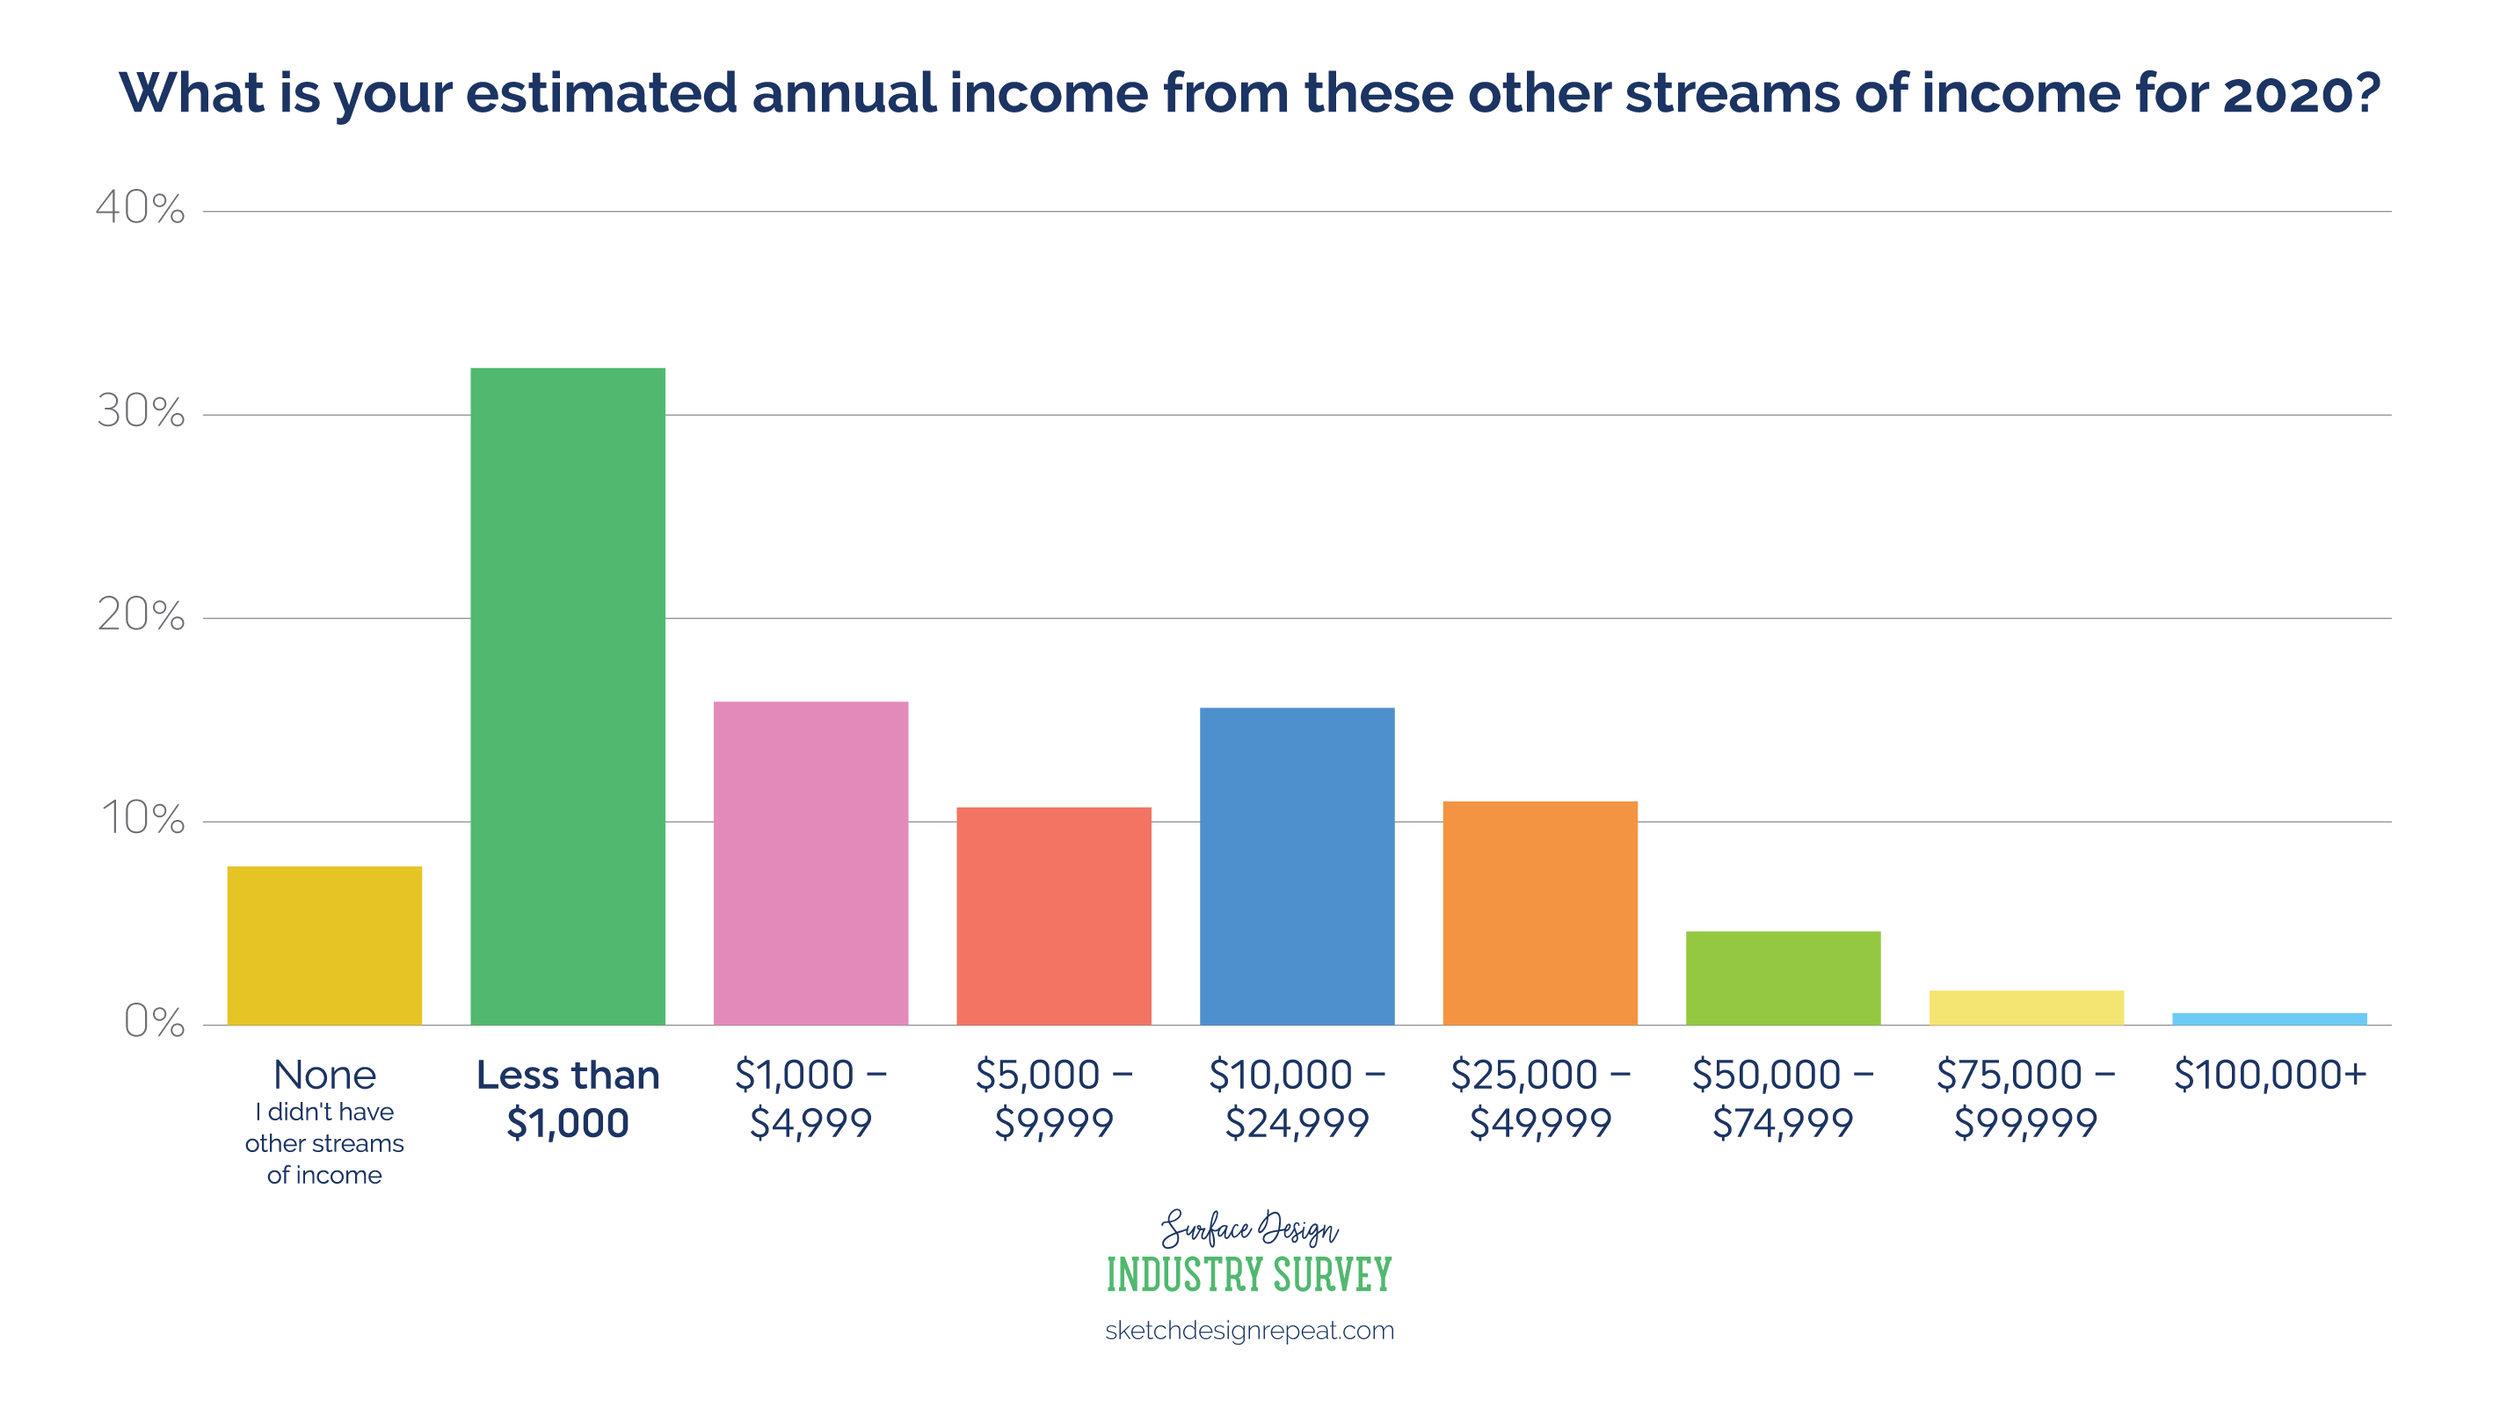 Surface Design Industry Survey 2020: income from other streams